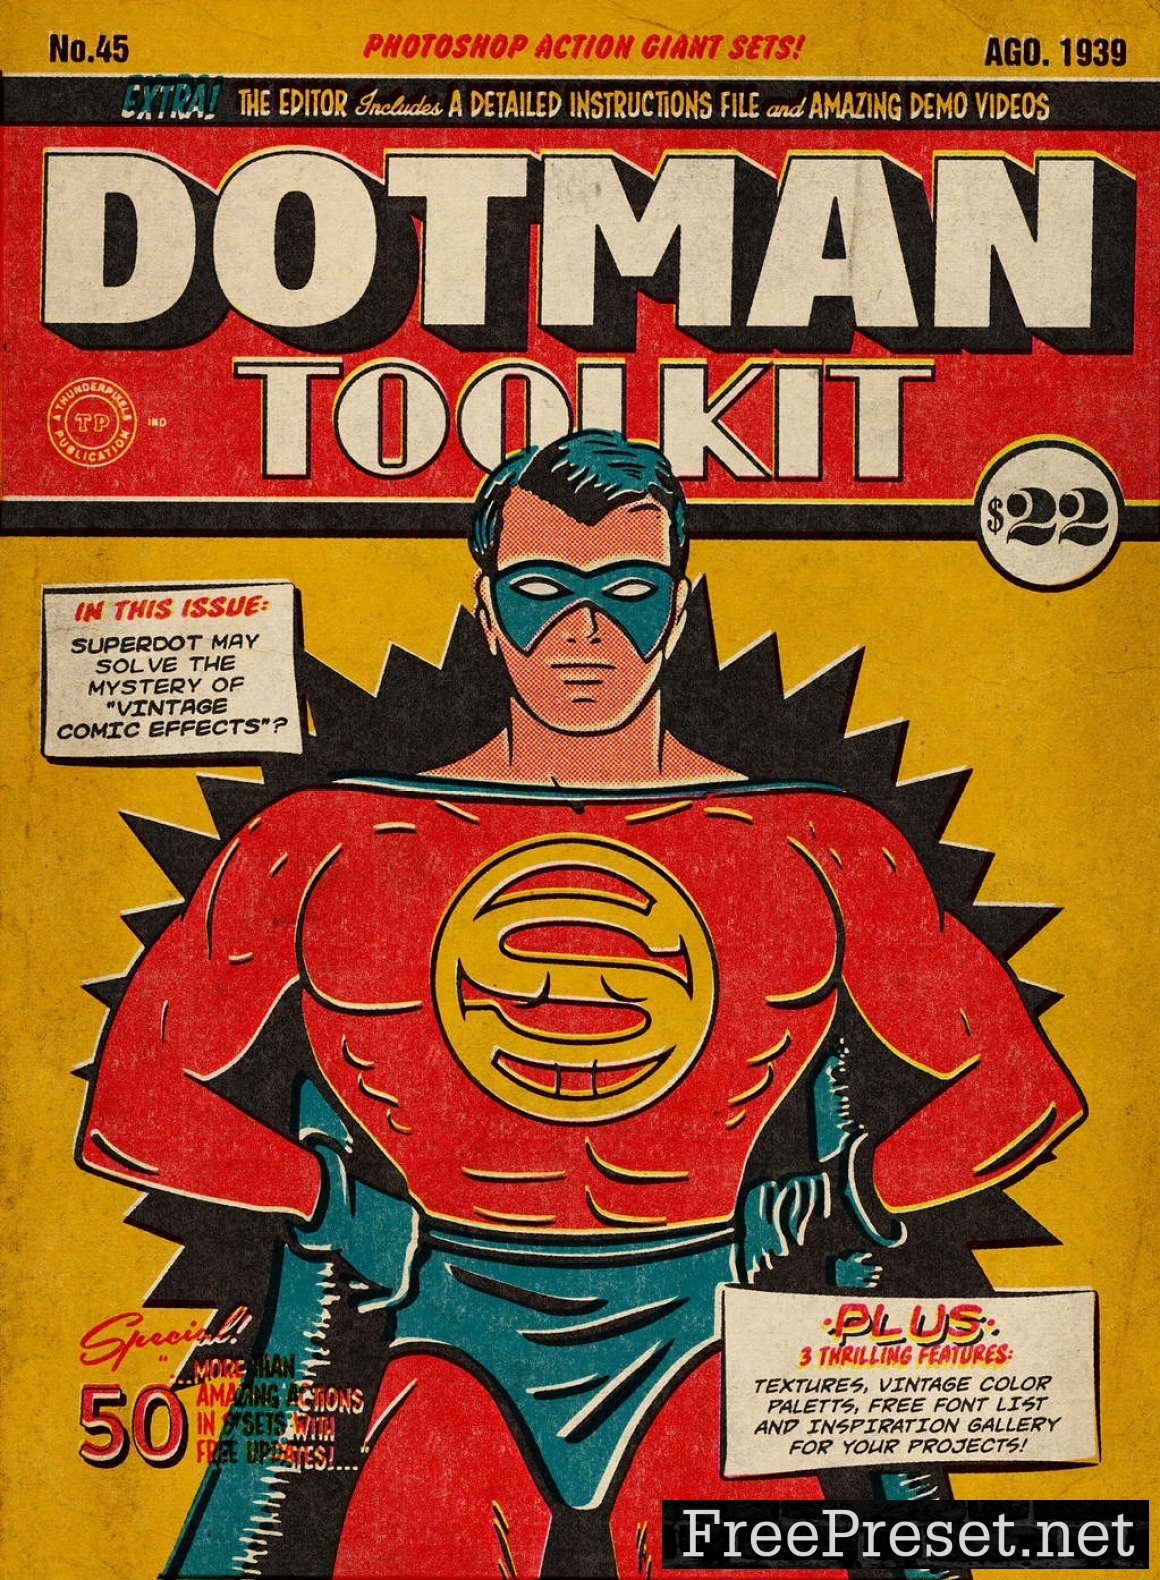 DotMan ToolKit Vintage Comic Effects PS 10950965